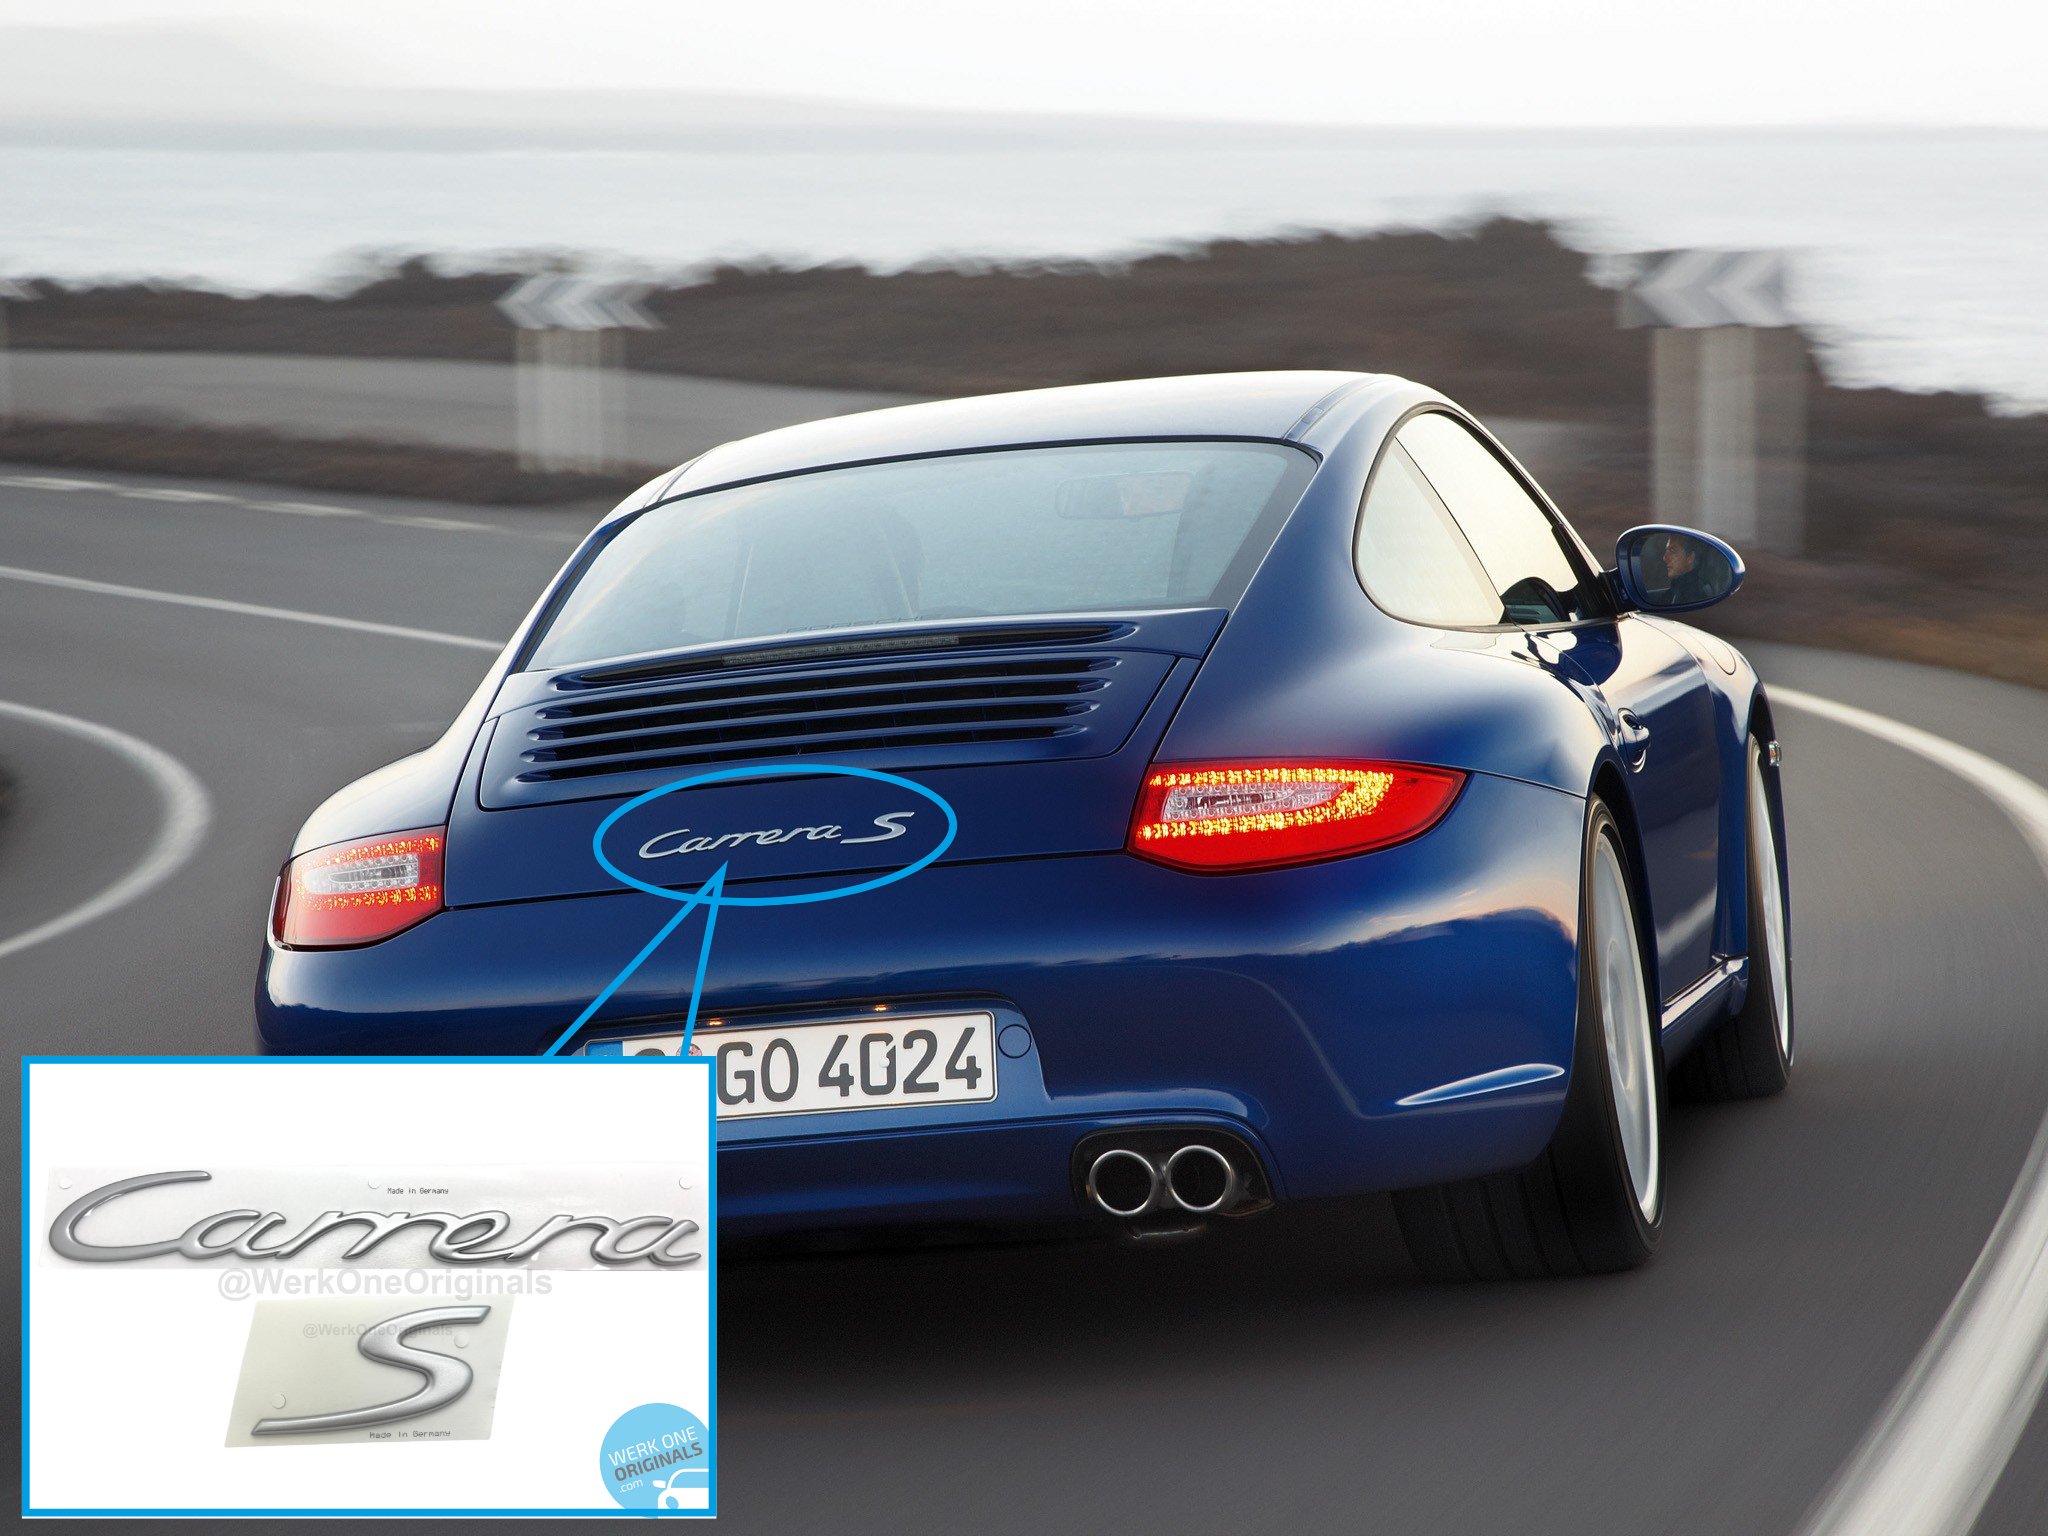 Porsche Official 'Carrera S' Rear Badge in Matte Silver for 911 Type 997 Carrera S Models